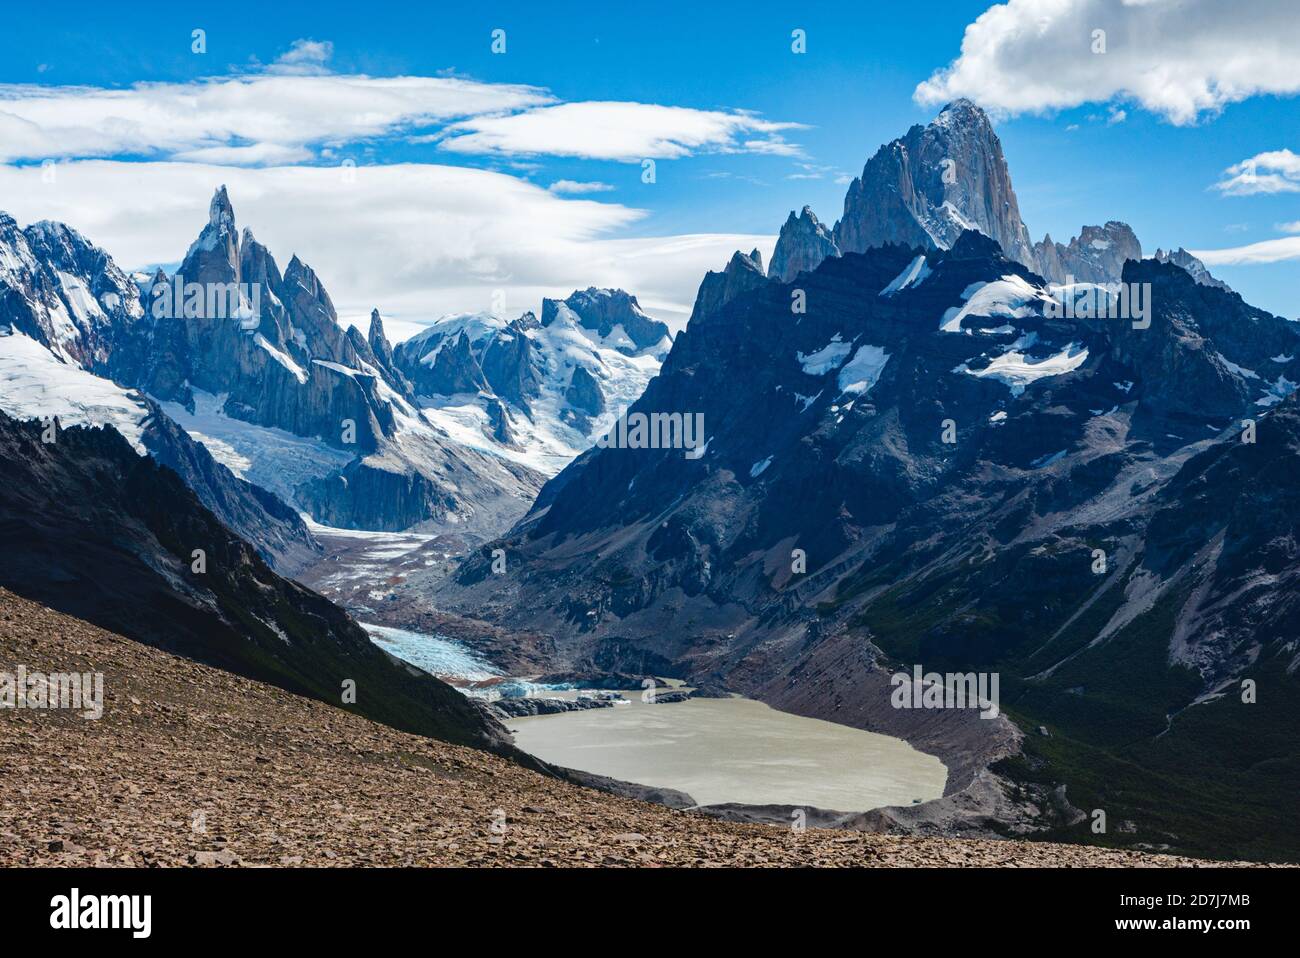 Cerro Torre and Fitz Roy with glaciers, snow and blue sky and clouds Stock Photo